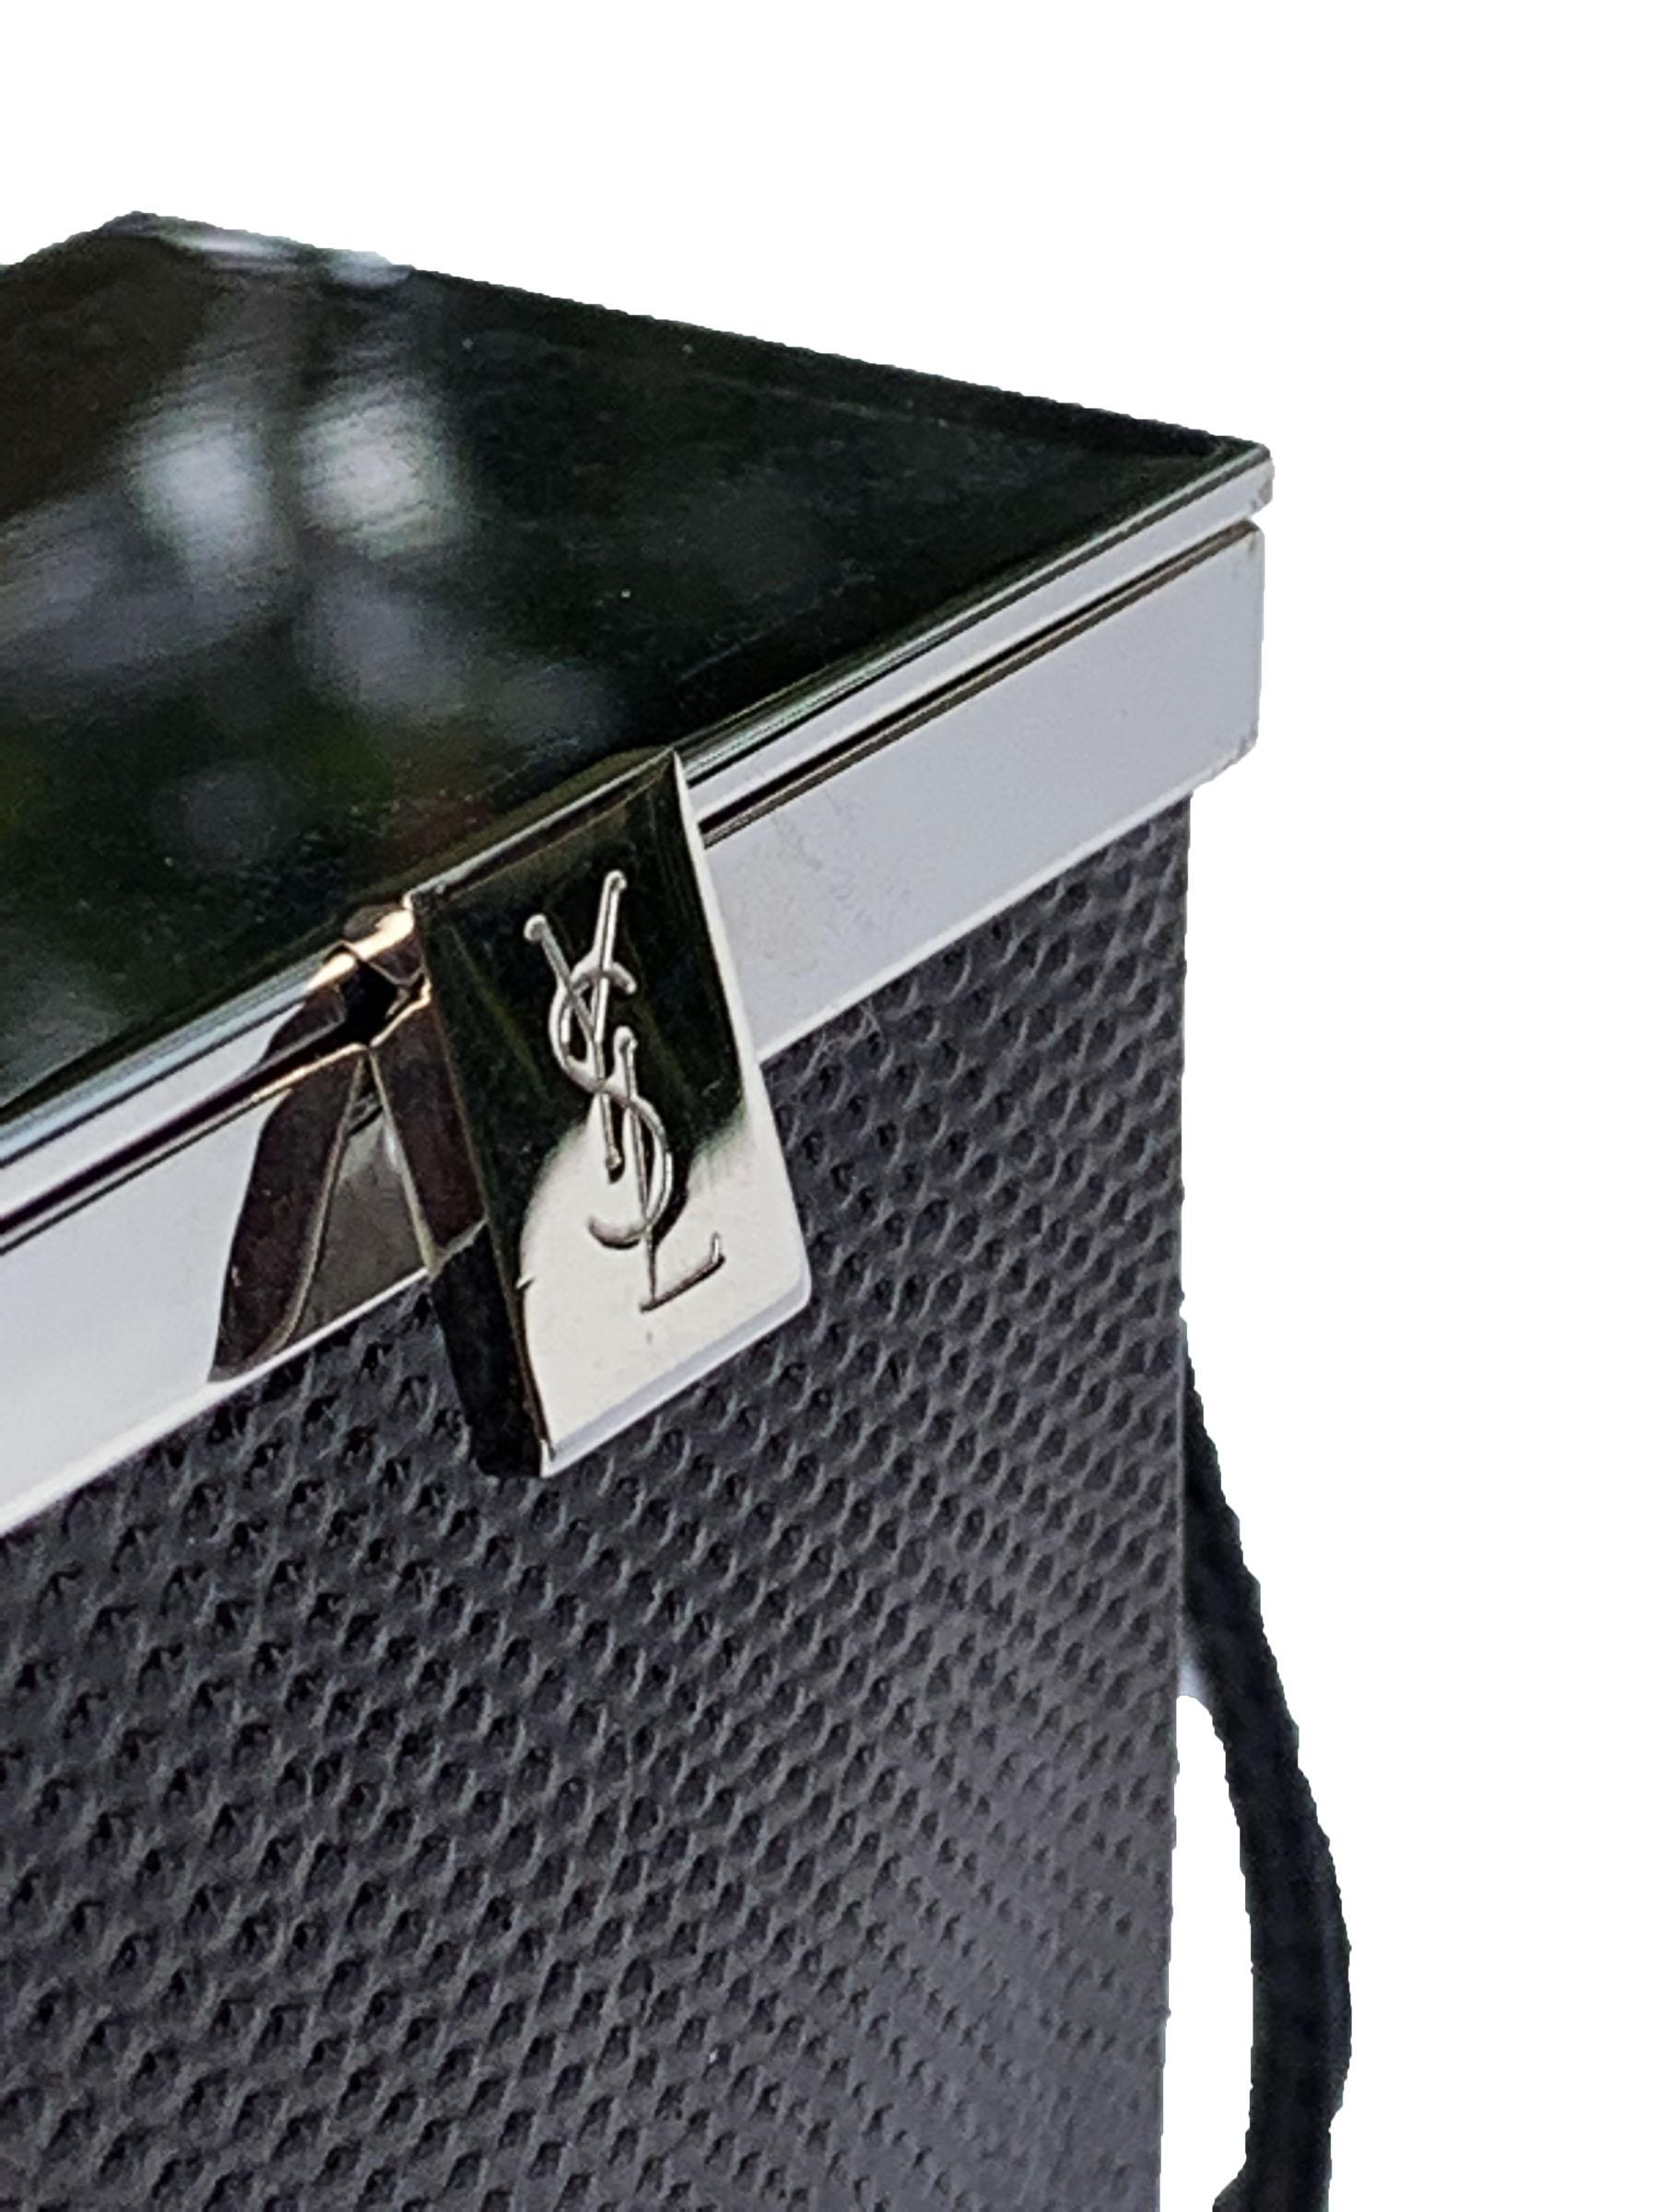 NWT Tom Ford for Yves Saint Laurent S/S 2001 Leather Cigarette Case and Lighter  For Sale 3